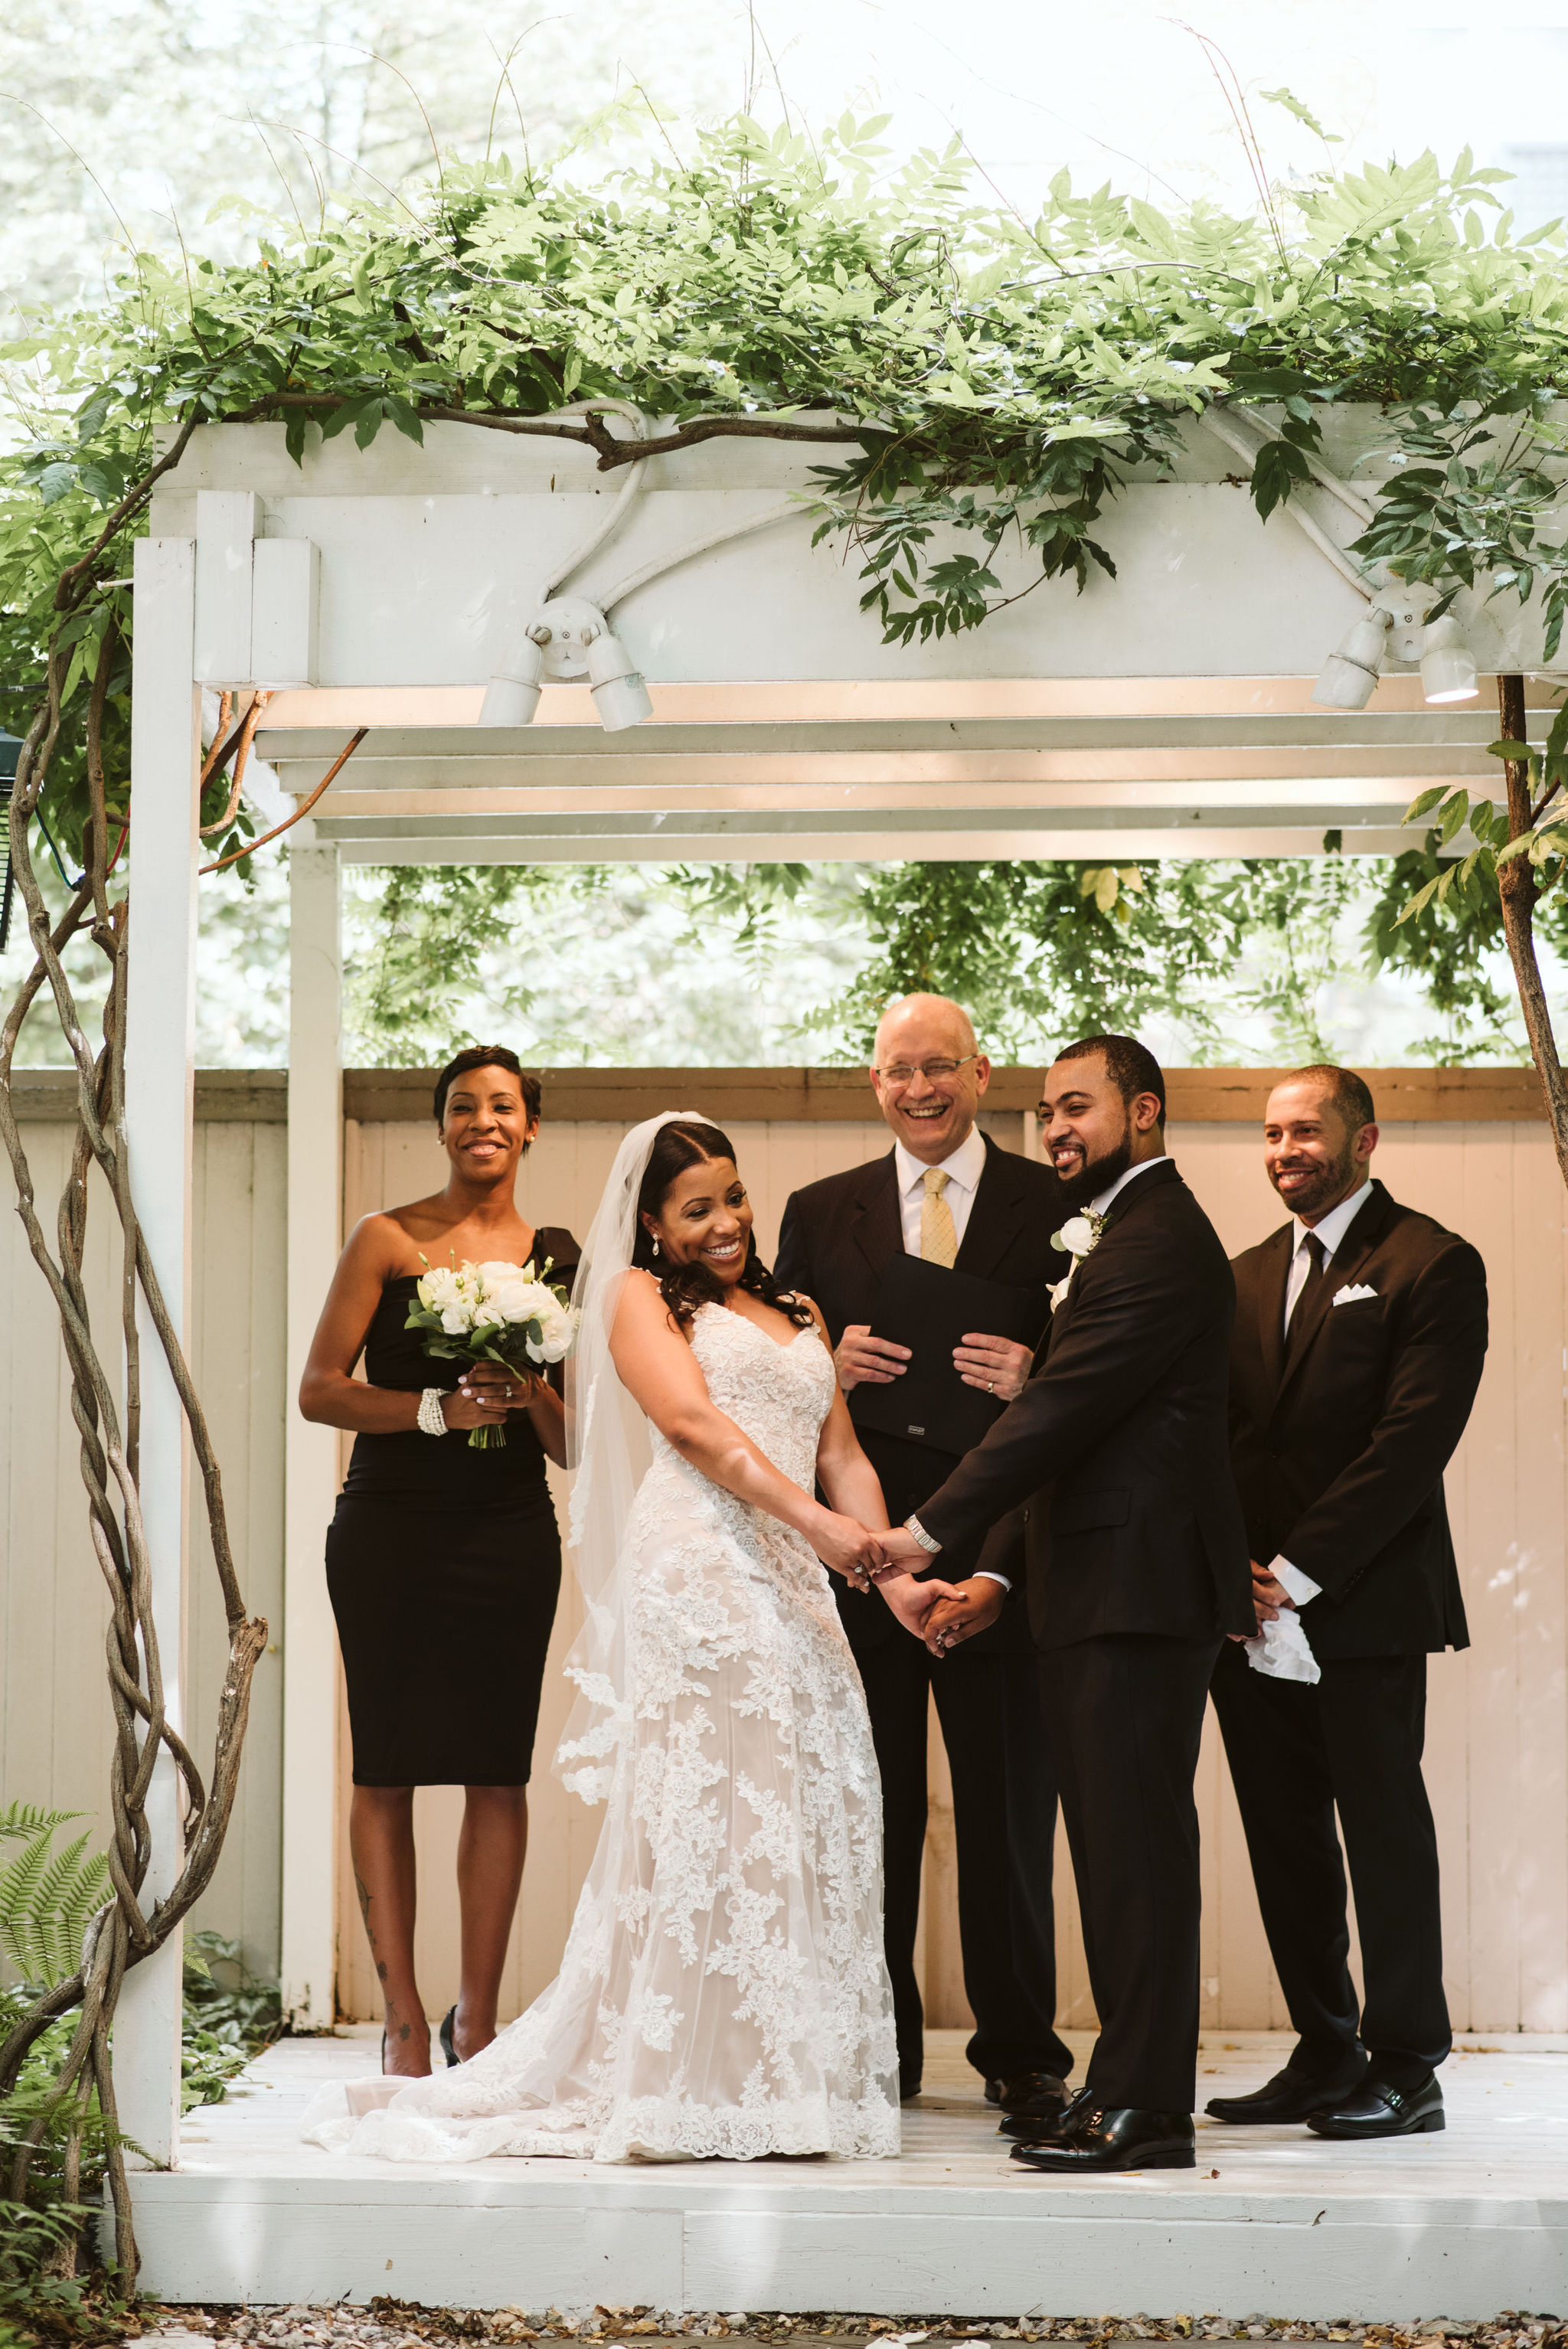  Baltimore, Maryland Wedding Photographer, Mount Vernon, Chase Court, Classic, Outdoor Ceremony, Garden, Romantic, Bride and Groom Smiling Together, Just Married, Lace Wedding Dress 